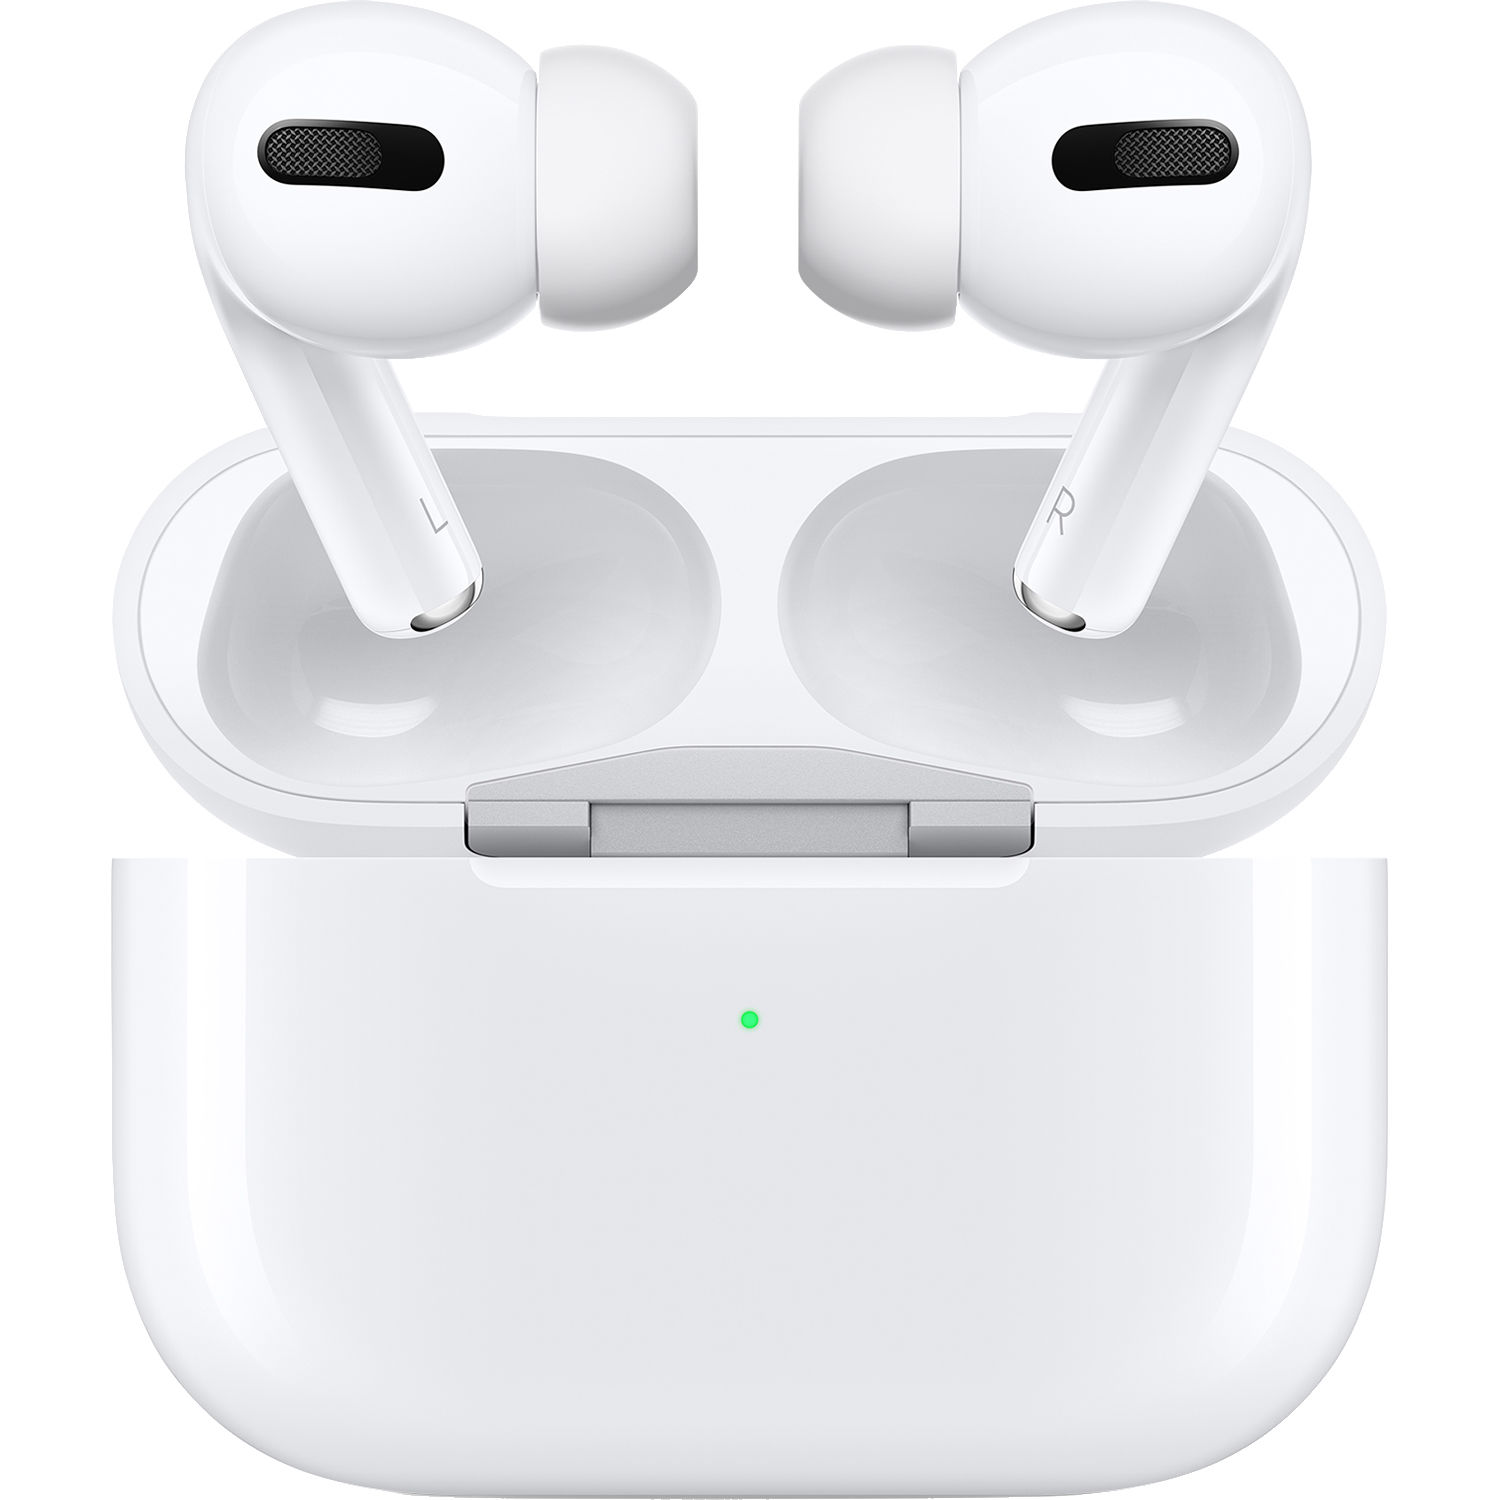 Apple AirPods (With Mic, In-Ear, Wireless, Without Noise Cancellation, Truly Wireless Bluetooth Headphones with Wireless Charging Case)